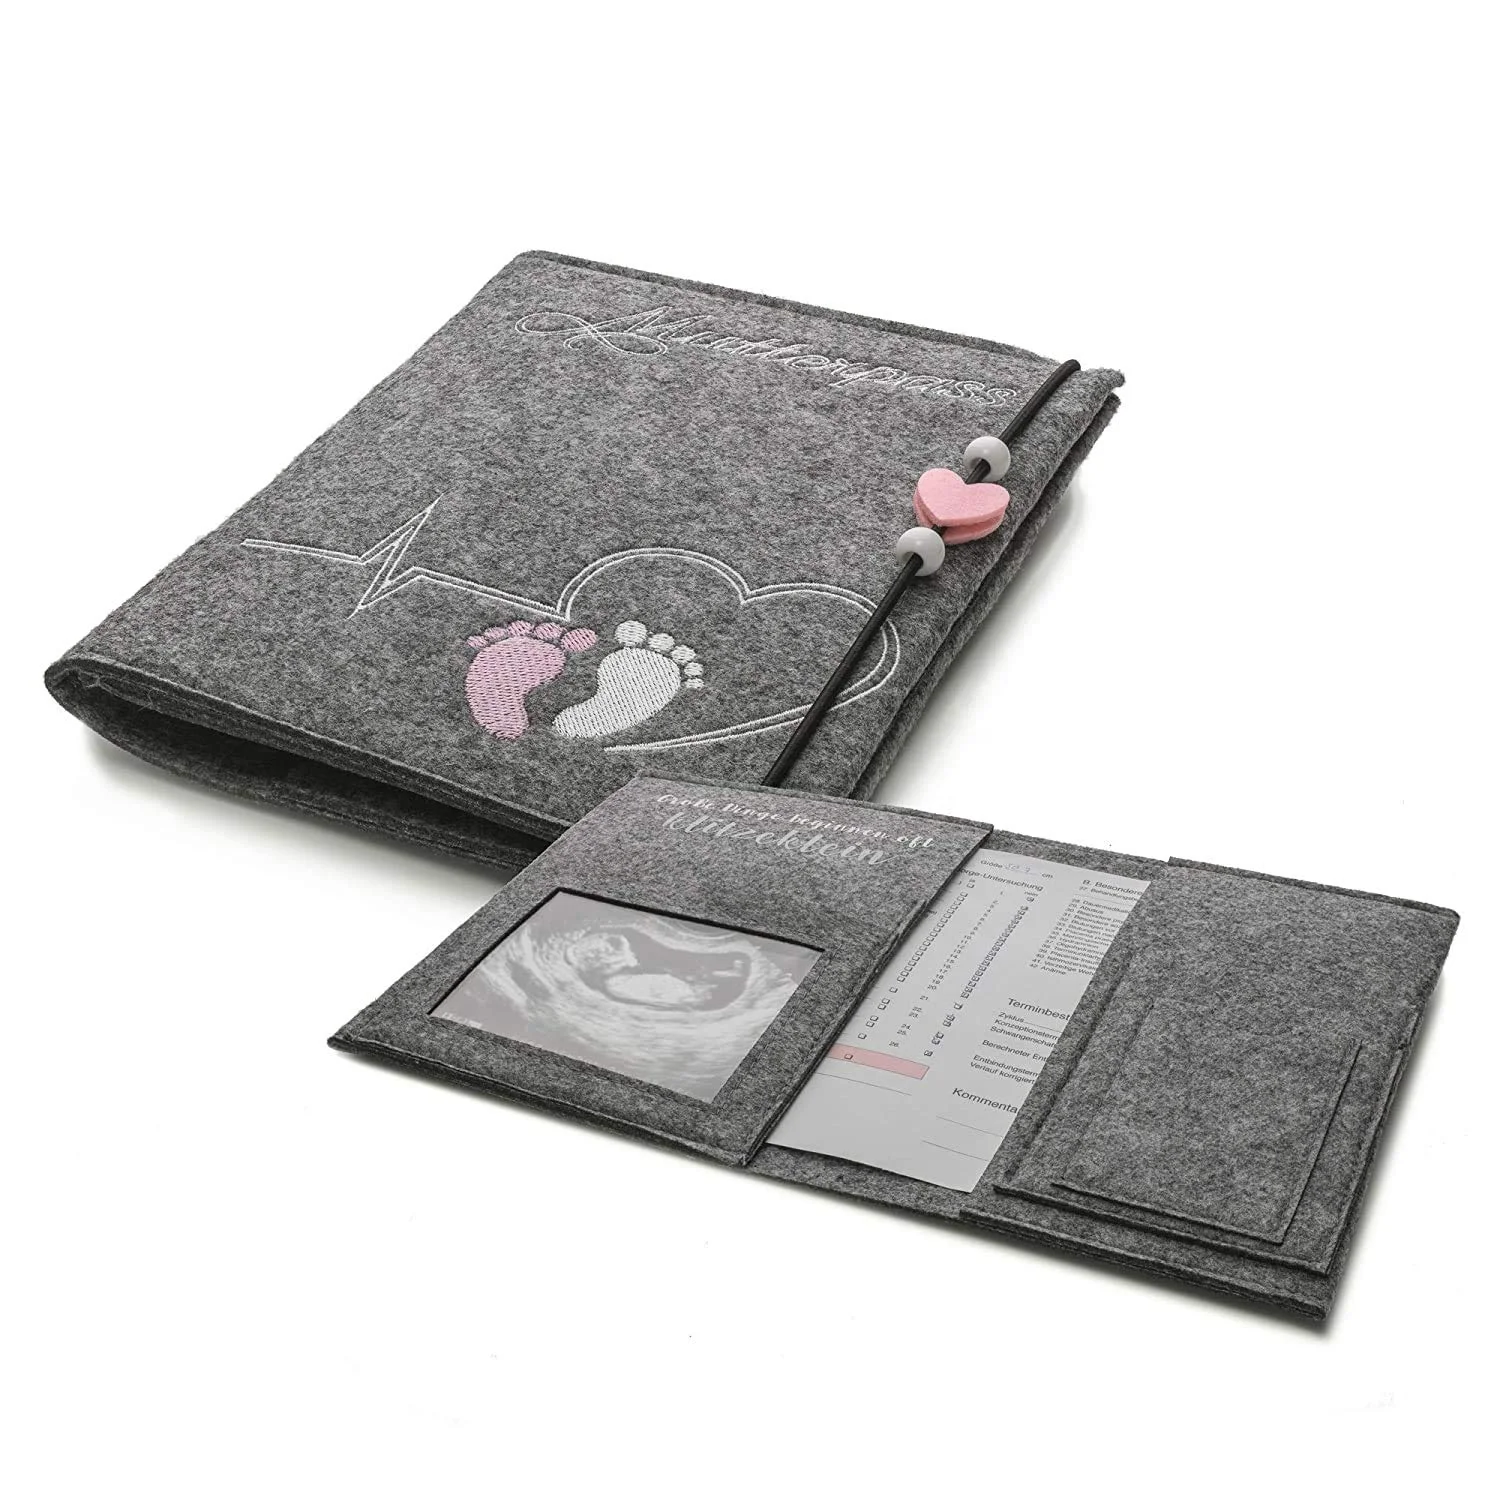 

German Mutterpass Cover Maternity Pass Cover Felt Mother Passport Cover for Ultrasound Image Insurance Card Vaccination, Grey,dark grey or beige